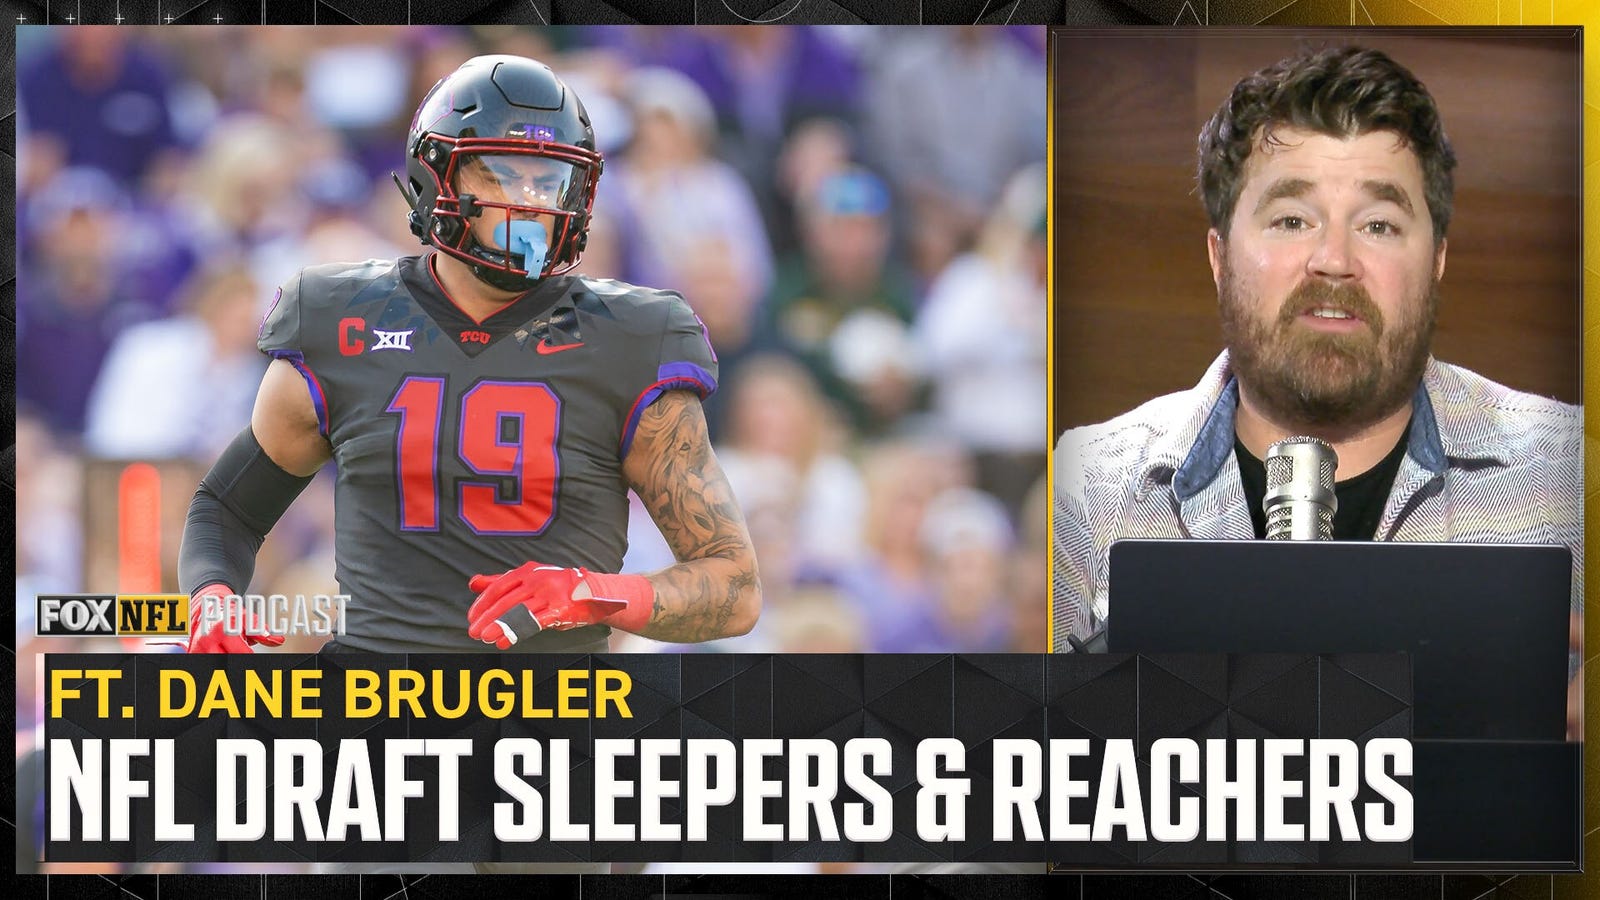 Biggest NFL Draft sleepers and reachers to watch out for